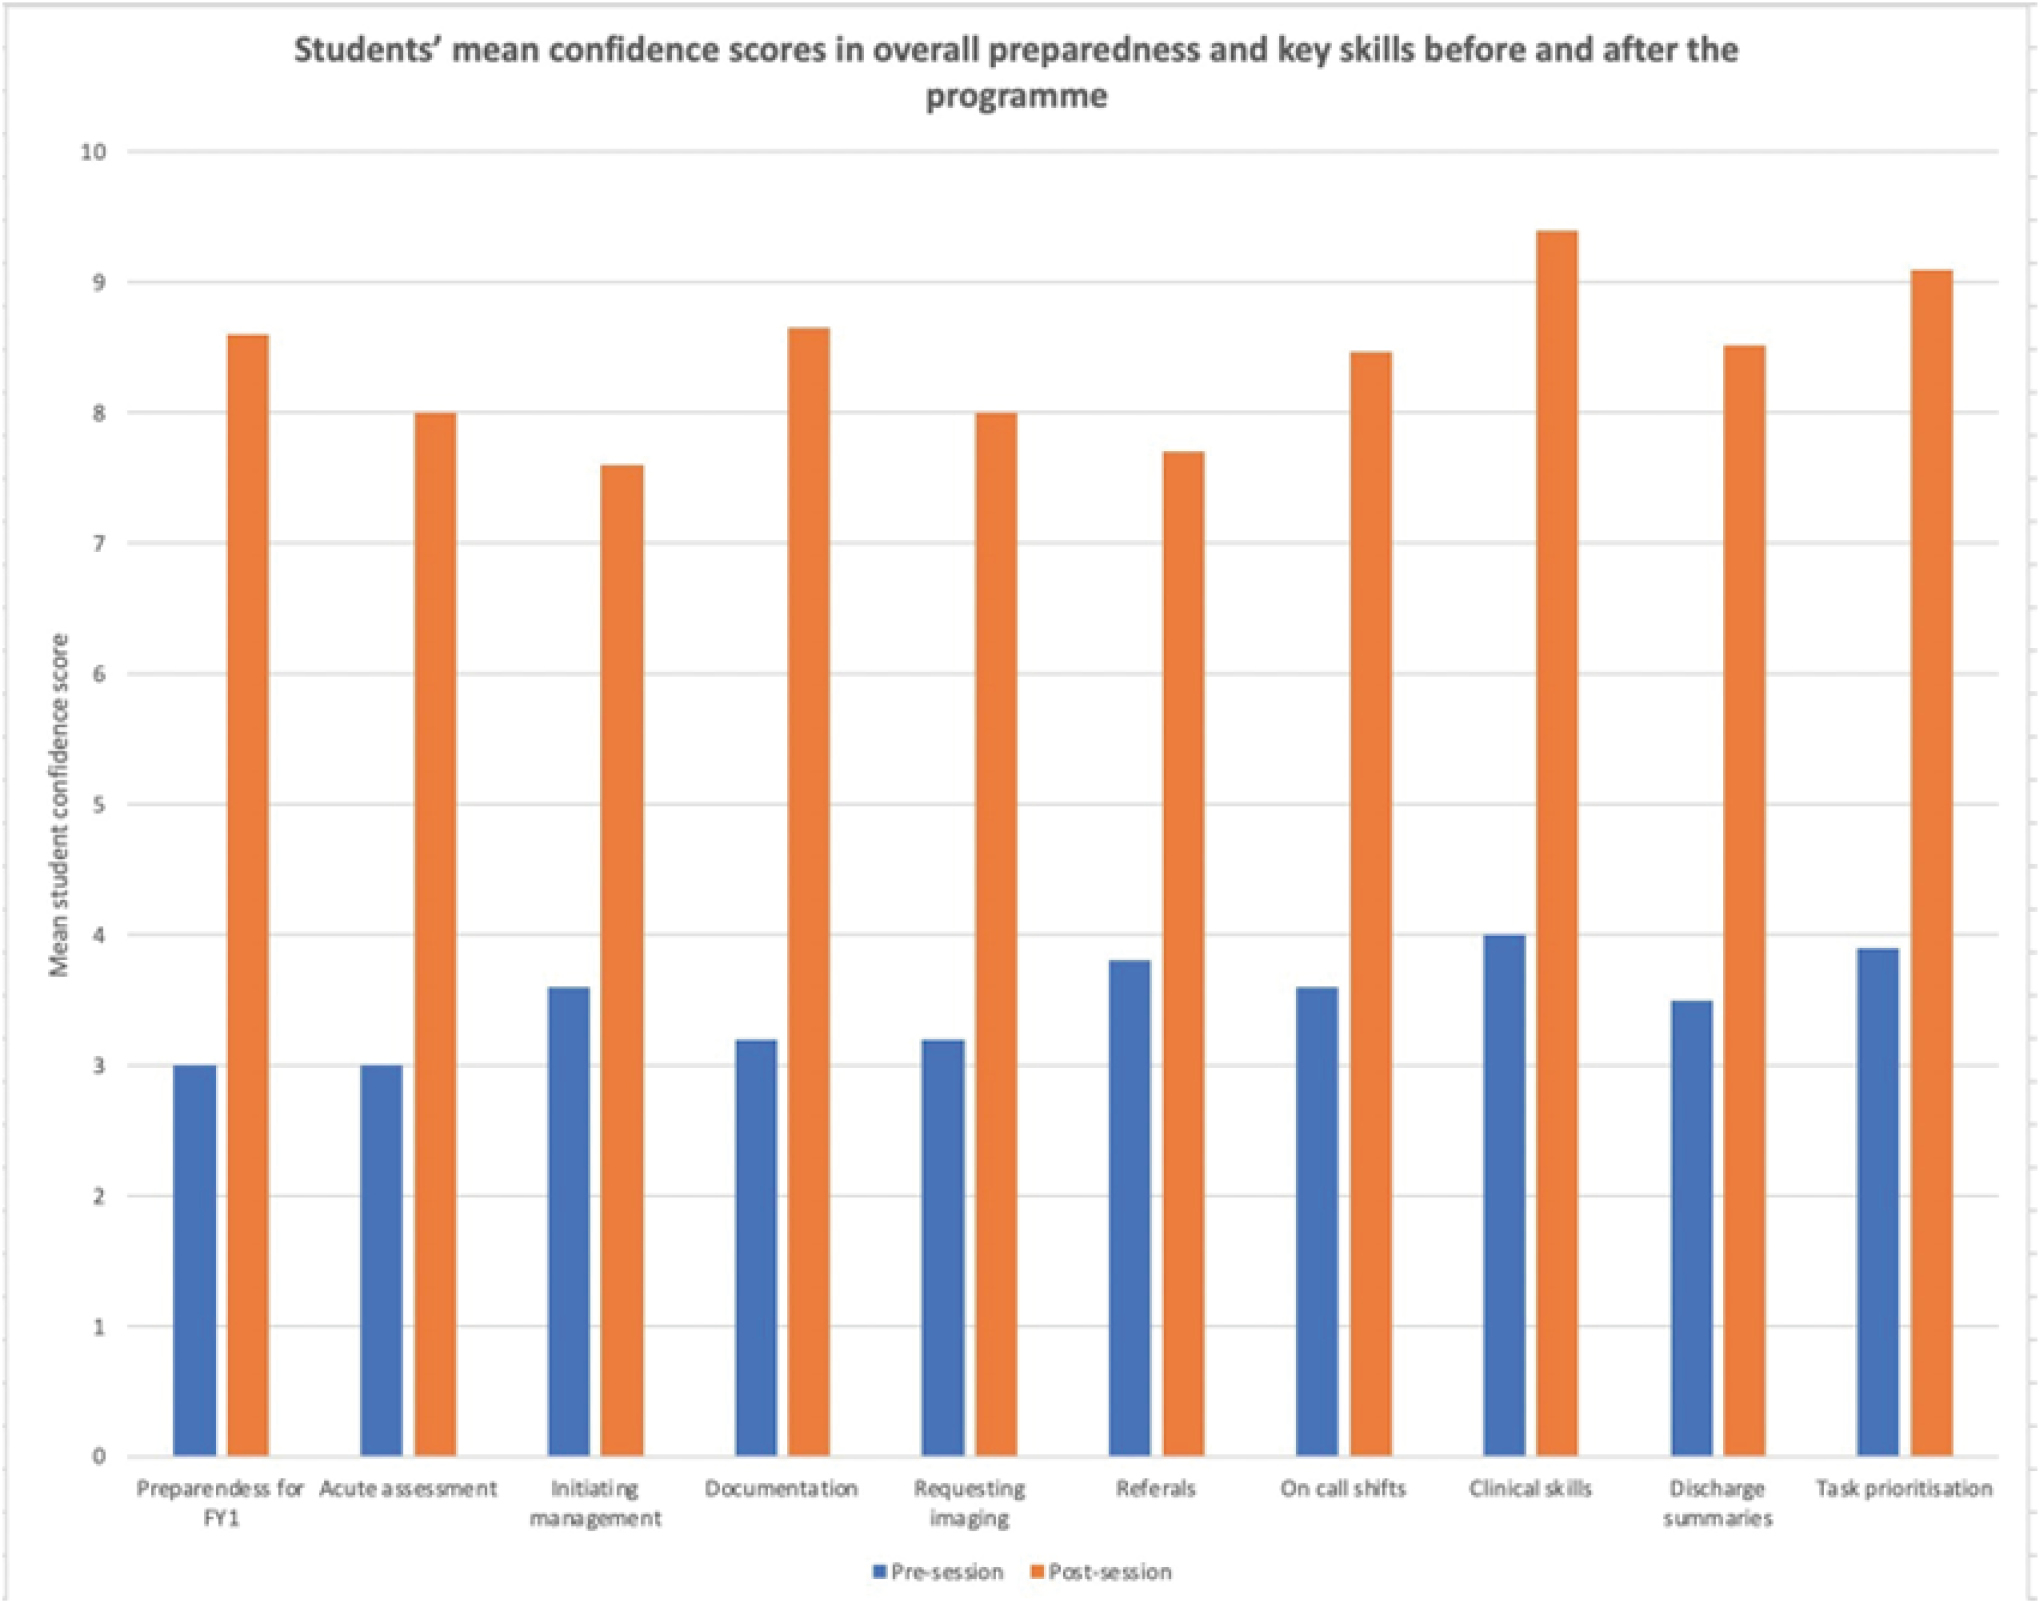 Students mean confidence score in overall preparedness and key skills before and after the programme. P < 0.001 for all domains.